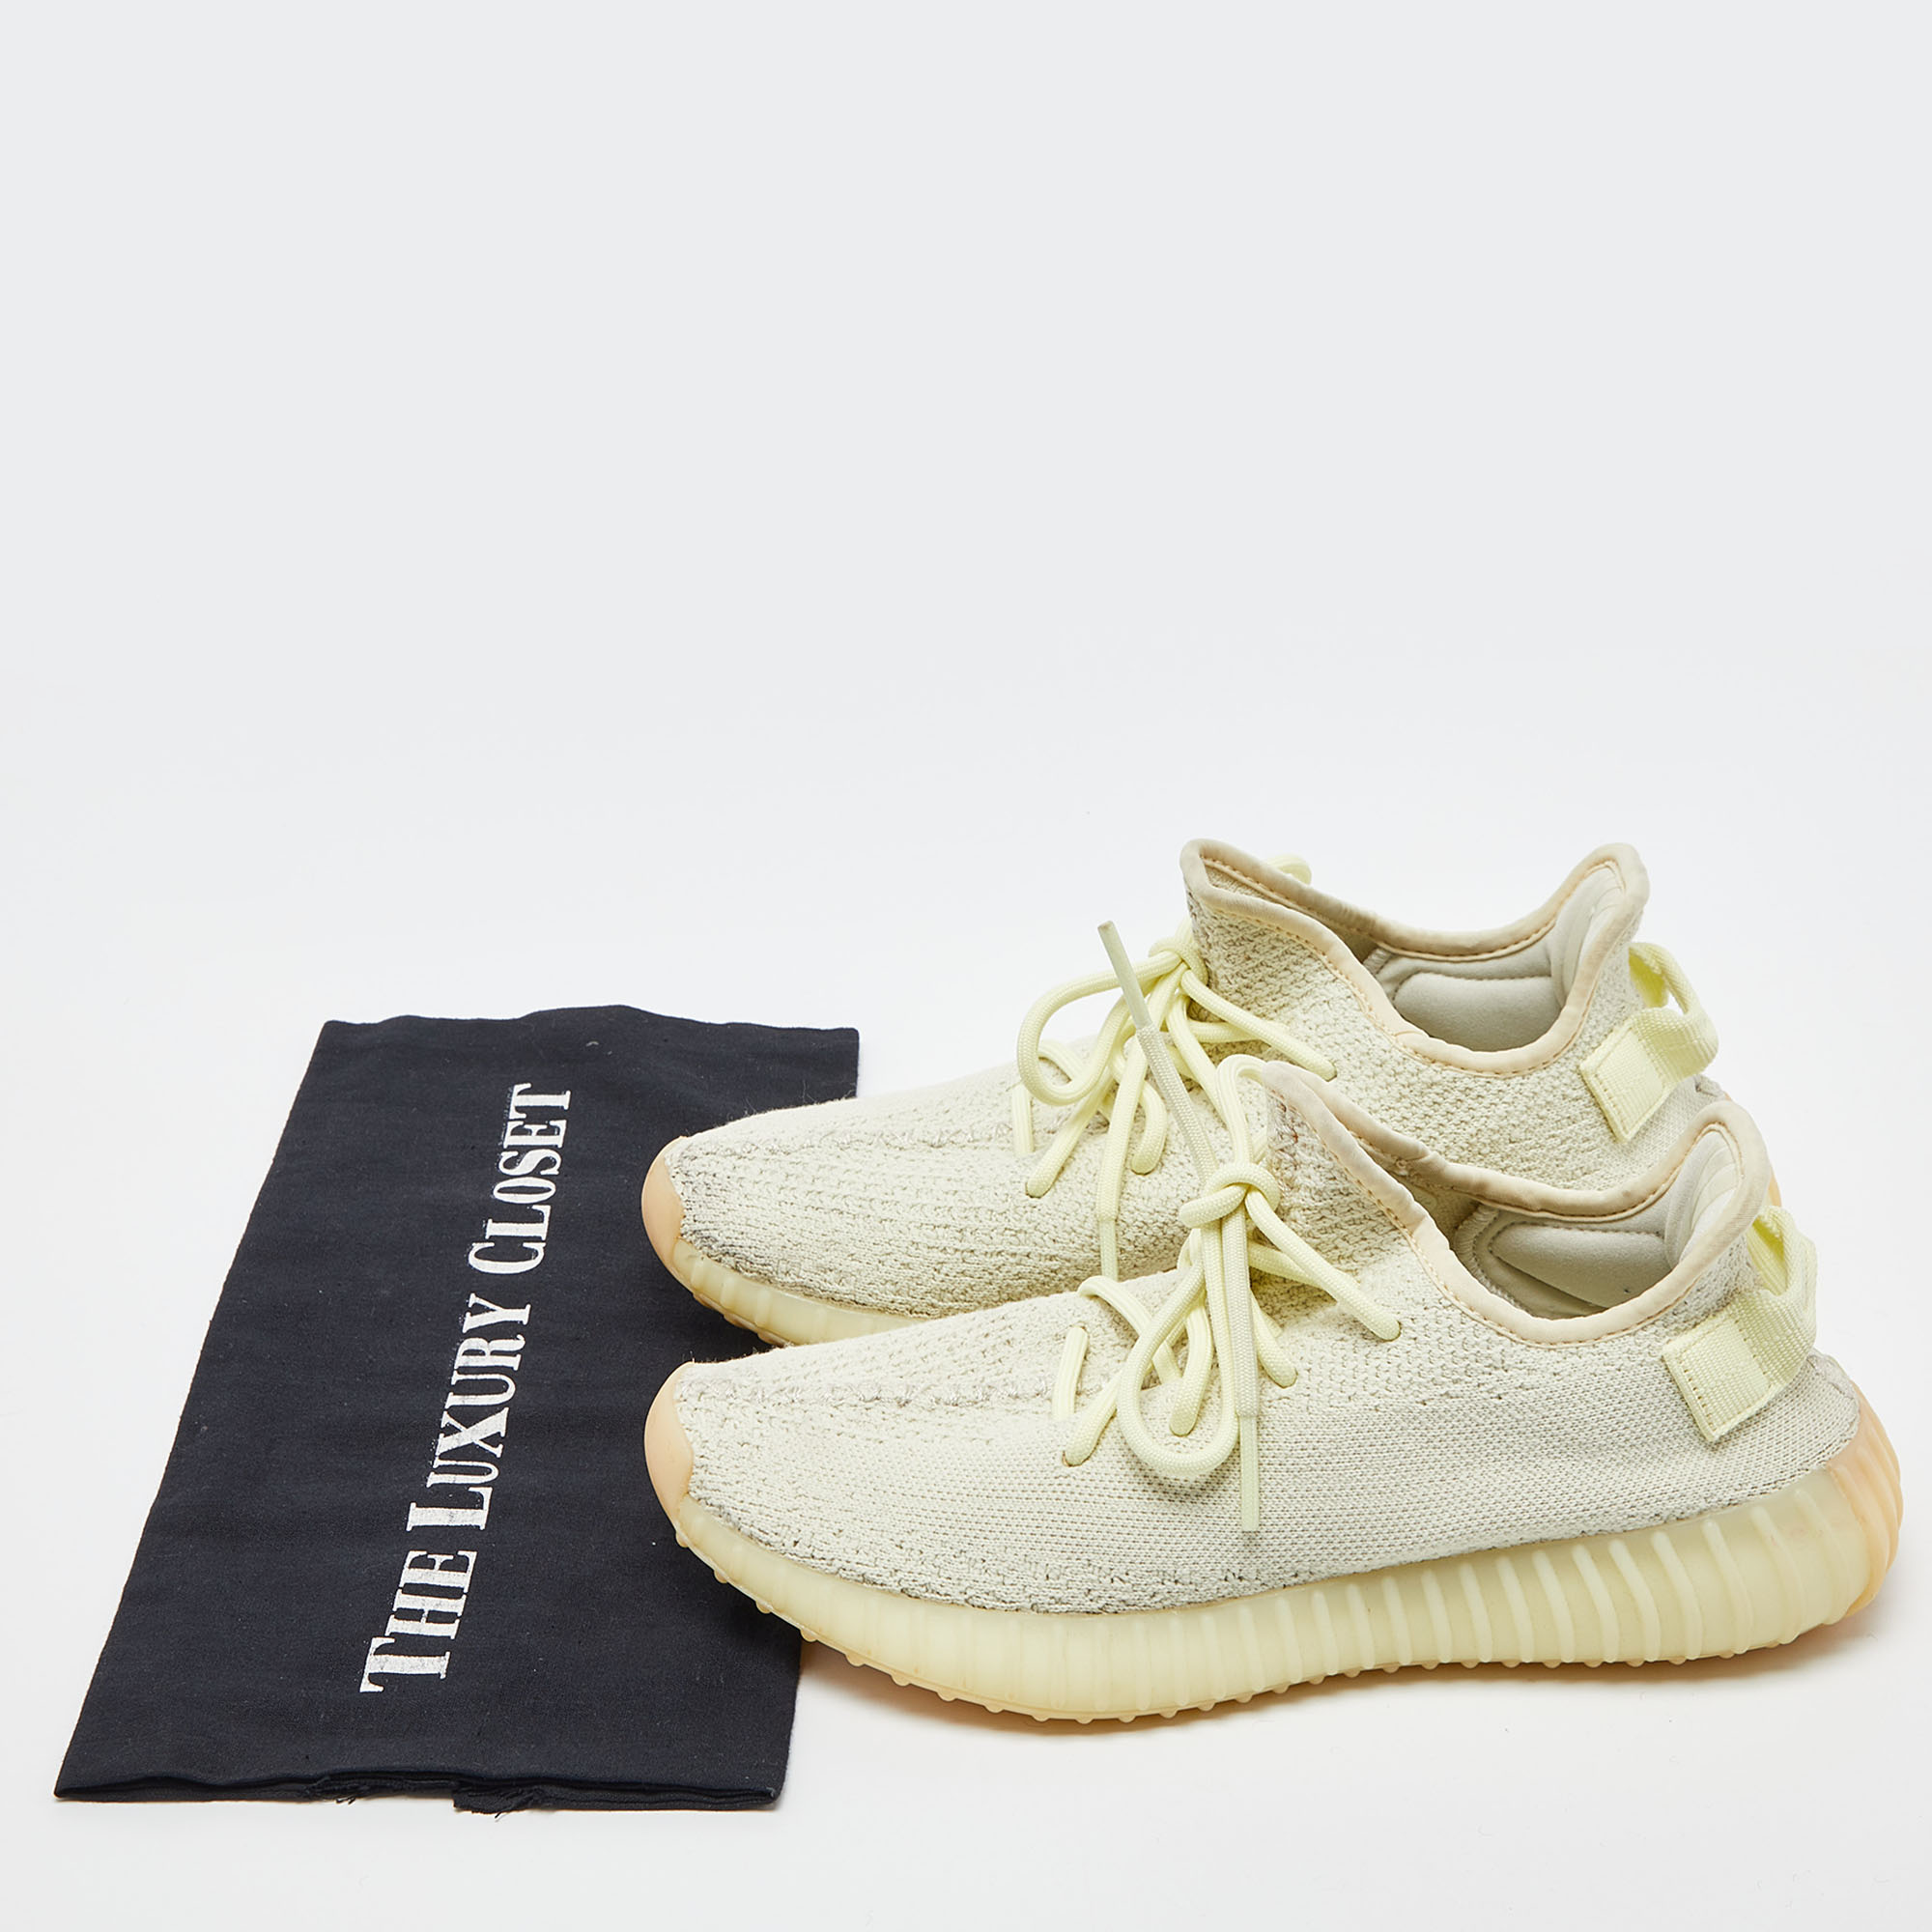 Yeezy X Adidas Green Knit Fabric Boost 350 V2 Butter Sneakers Size 39 1/3